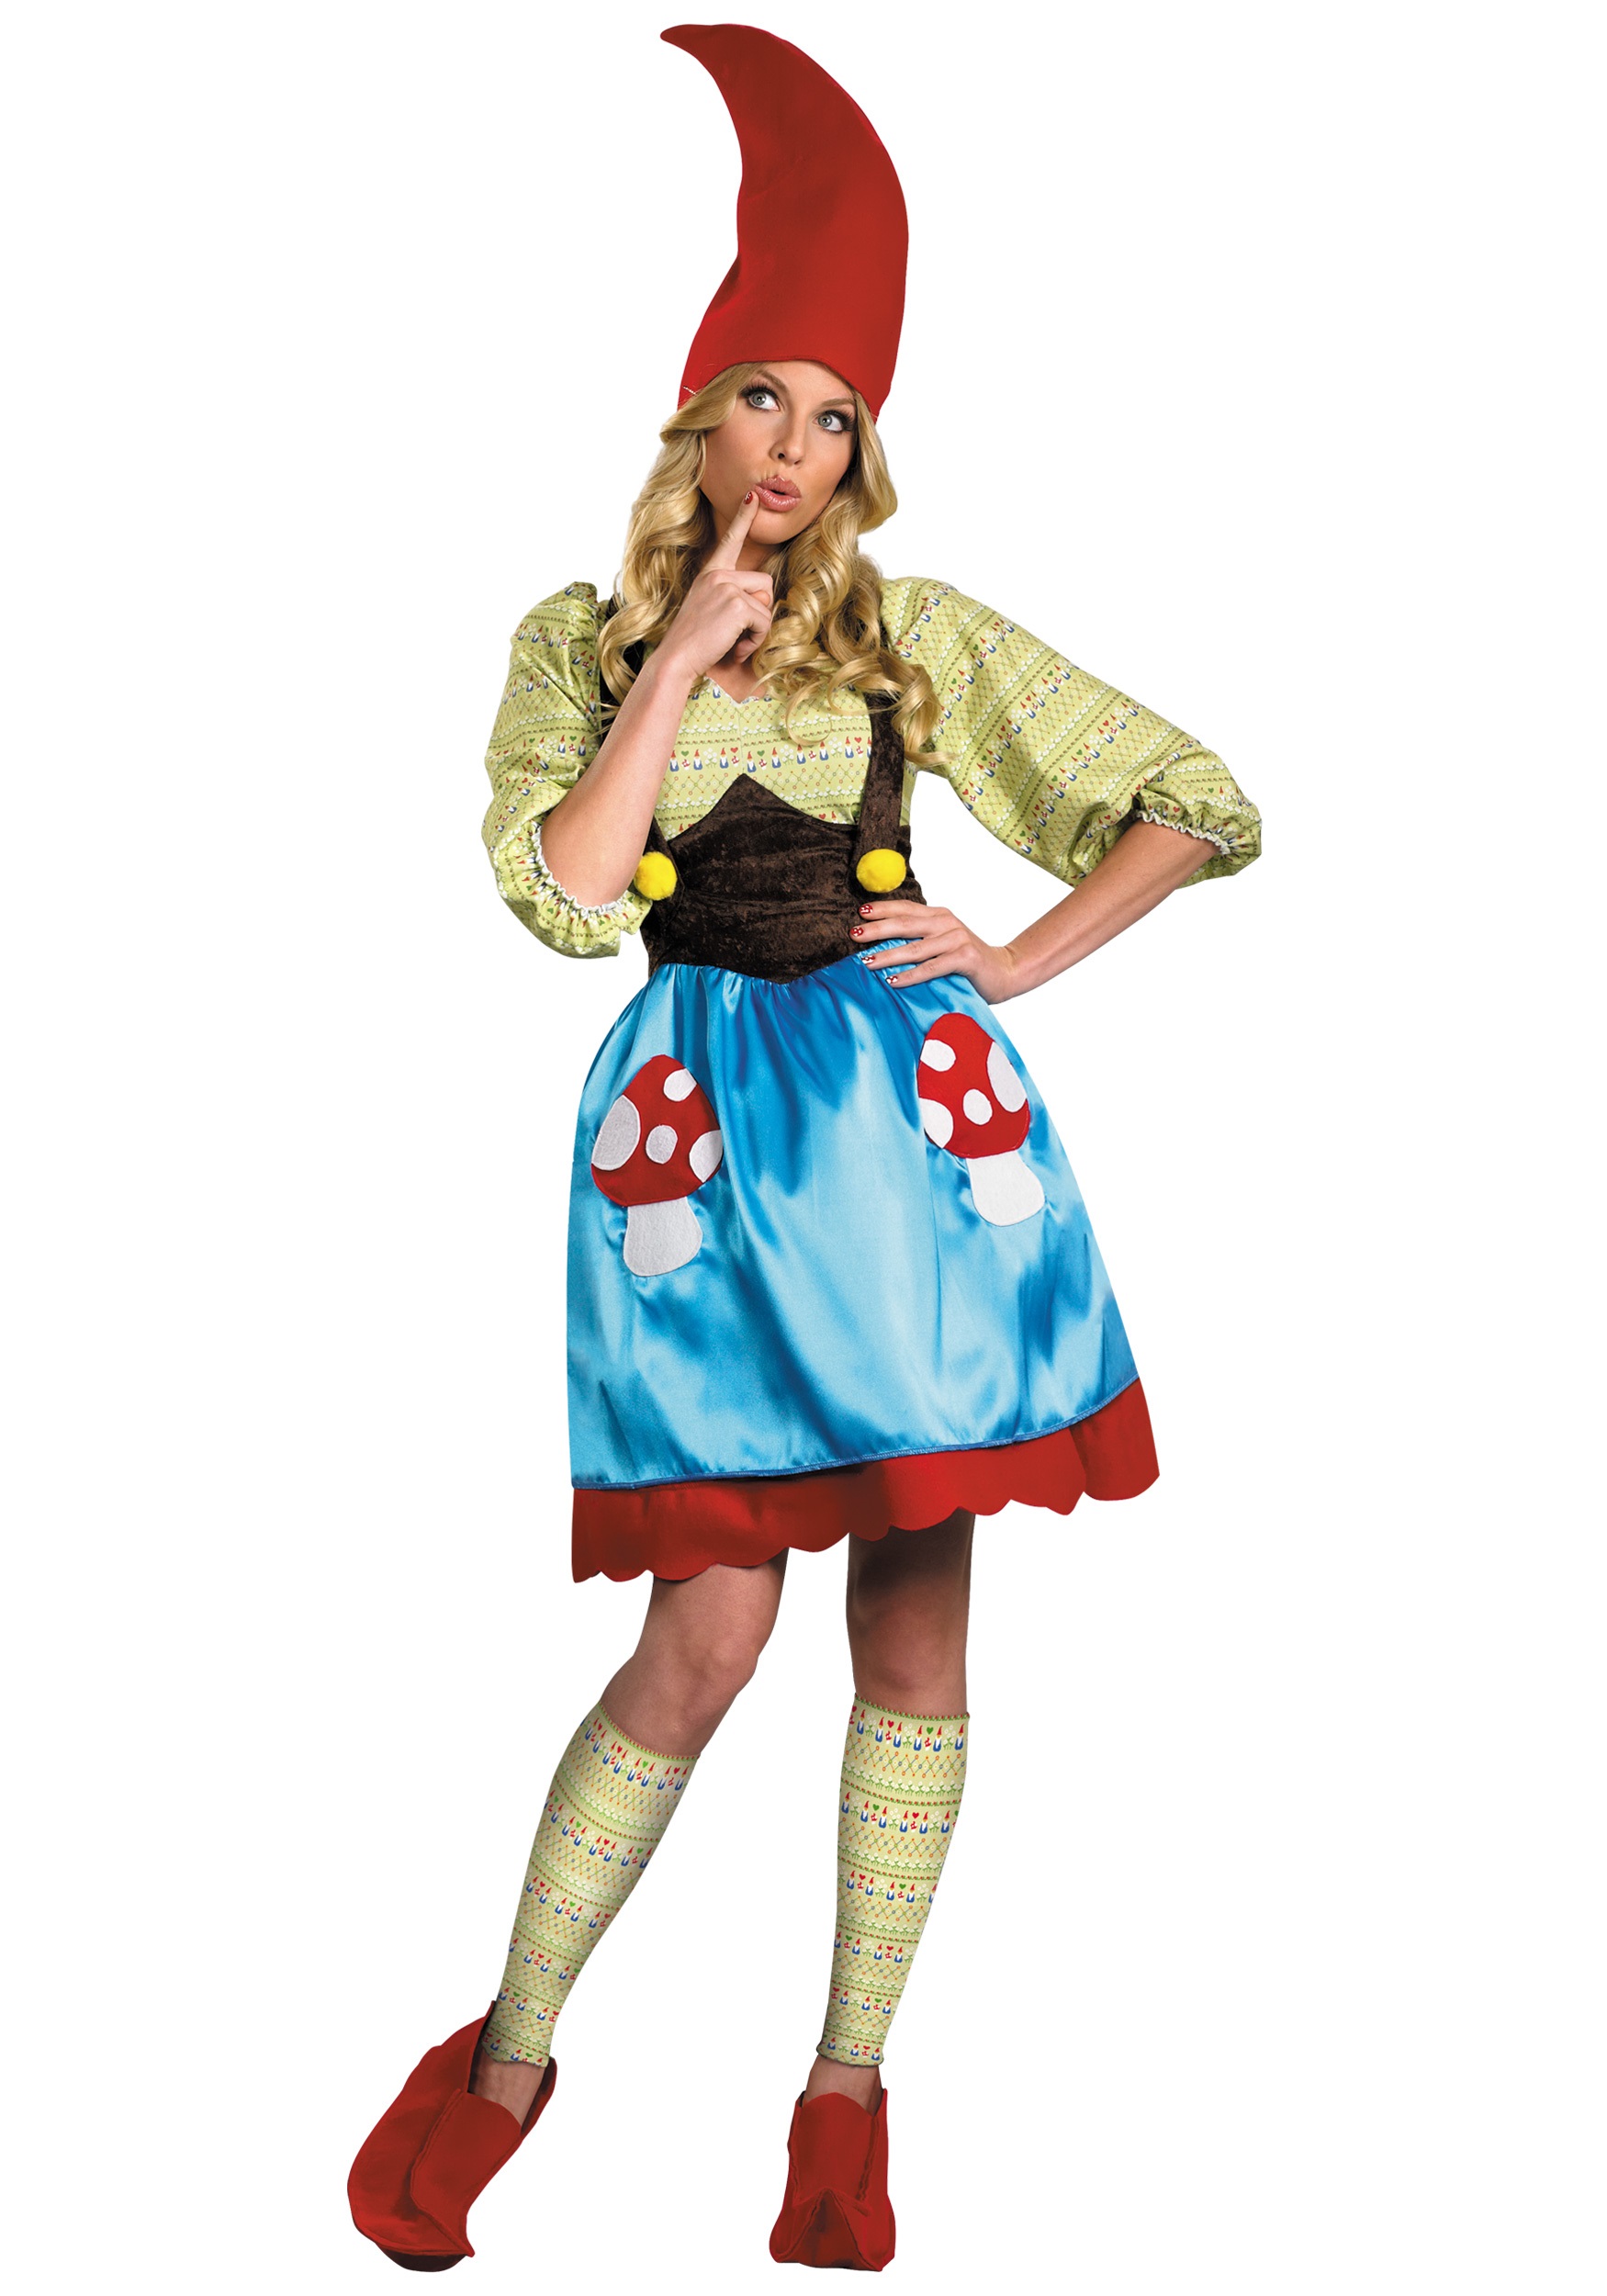 Photos - Fancy Dress Disguise Miss Gnome Costume Green/Red/Blue DI38208